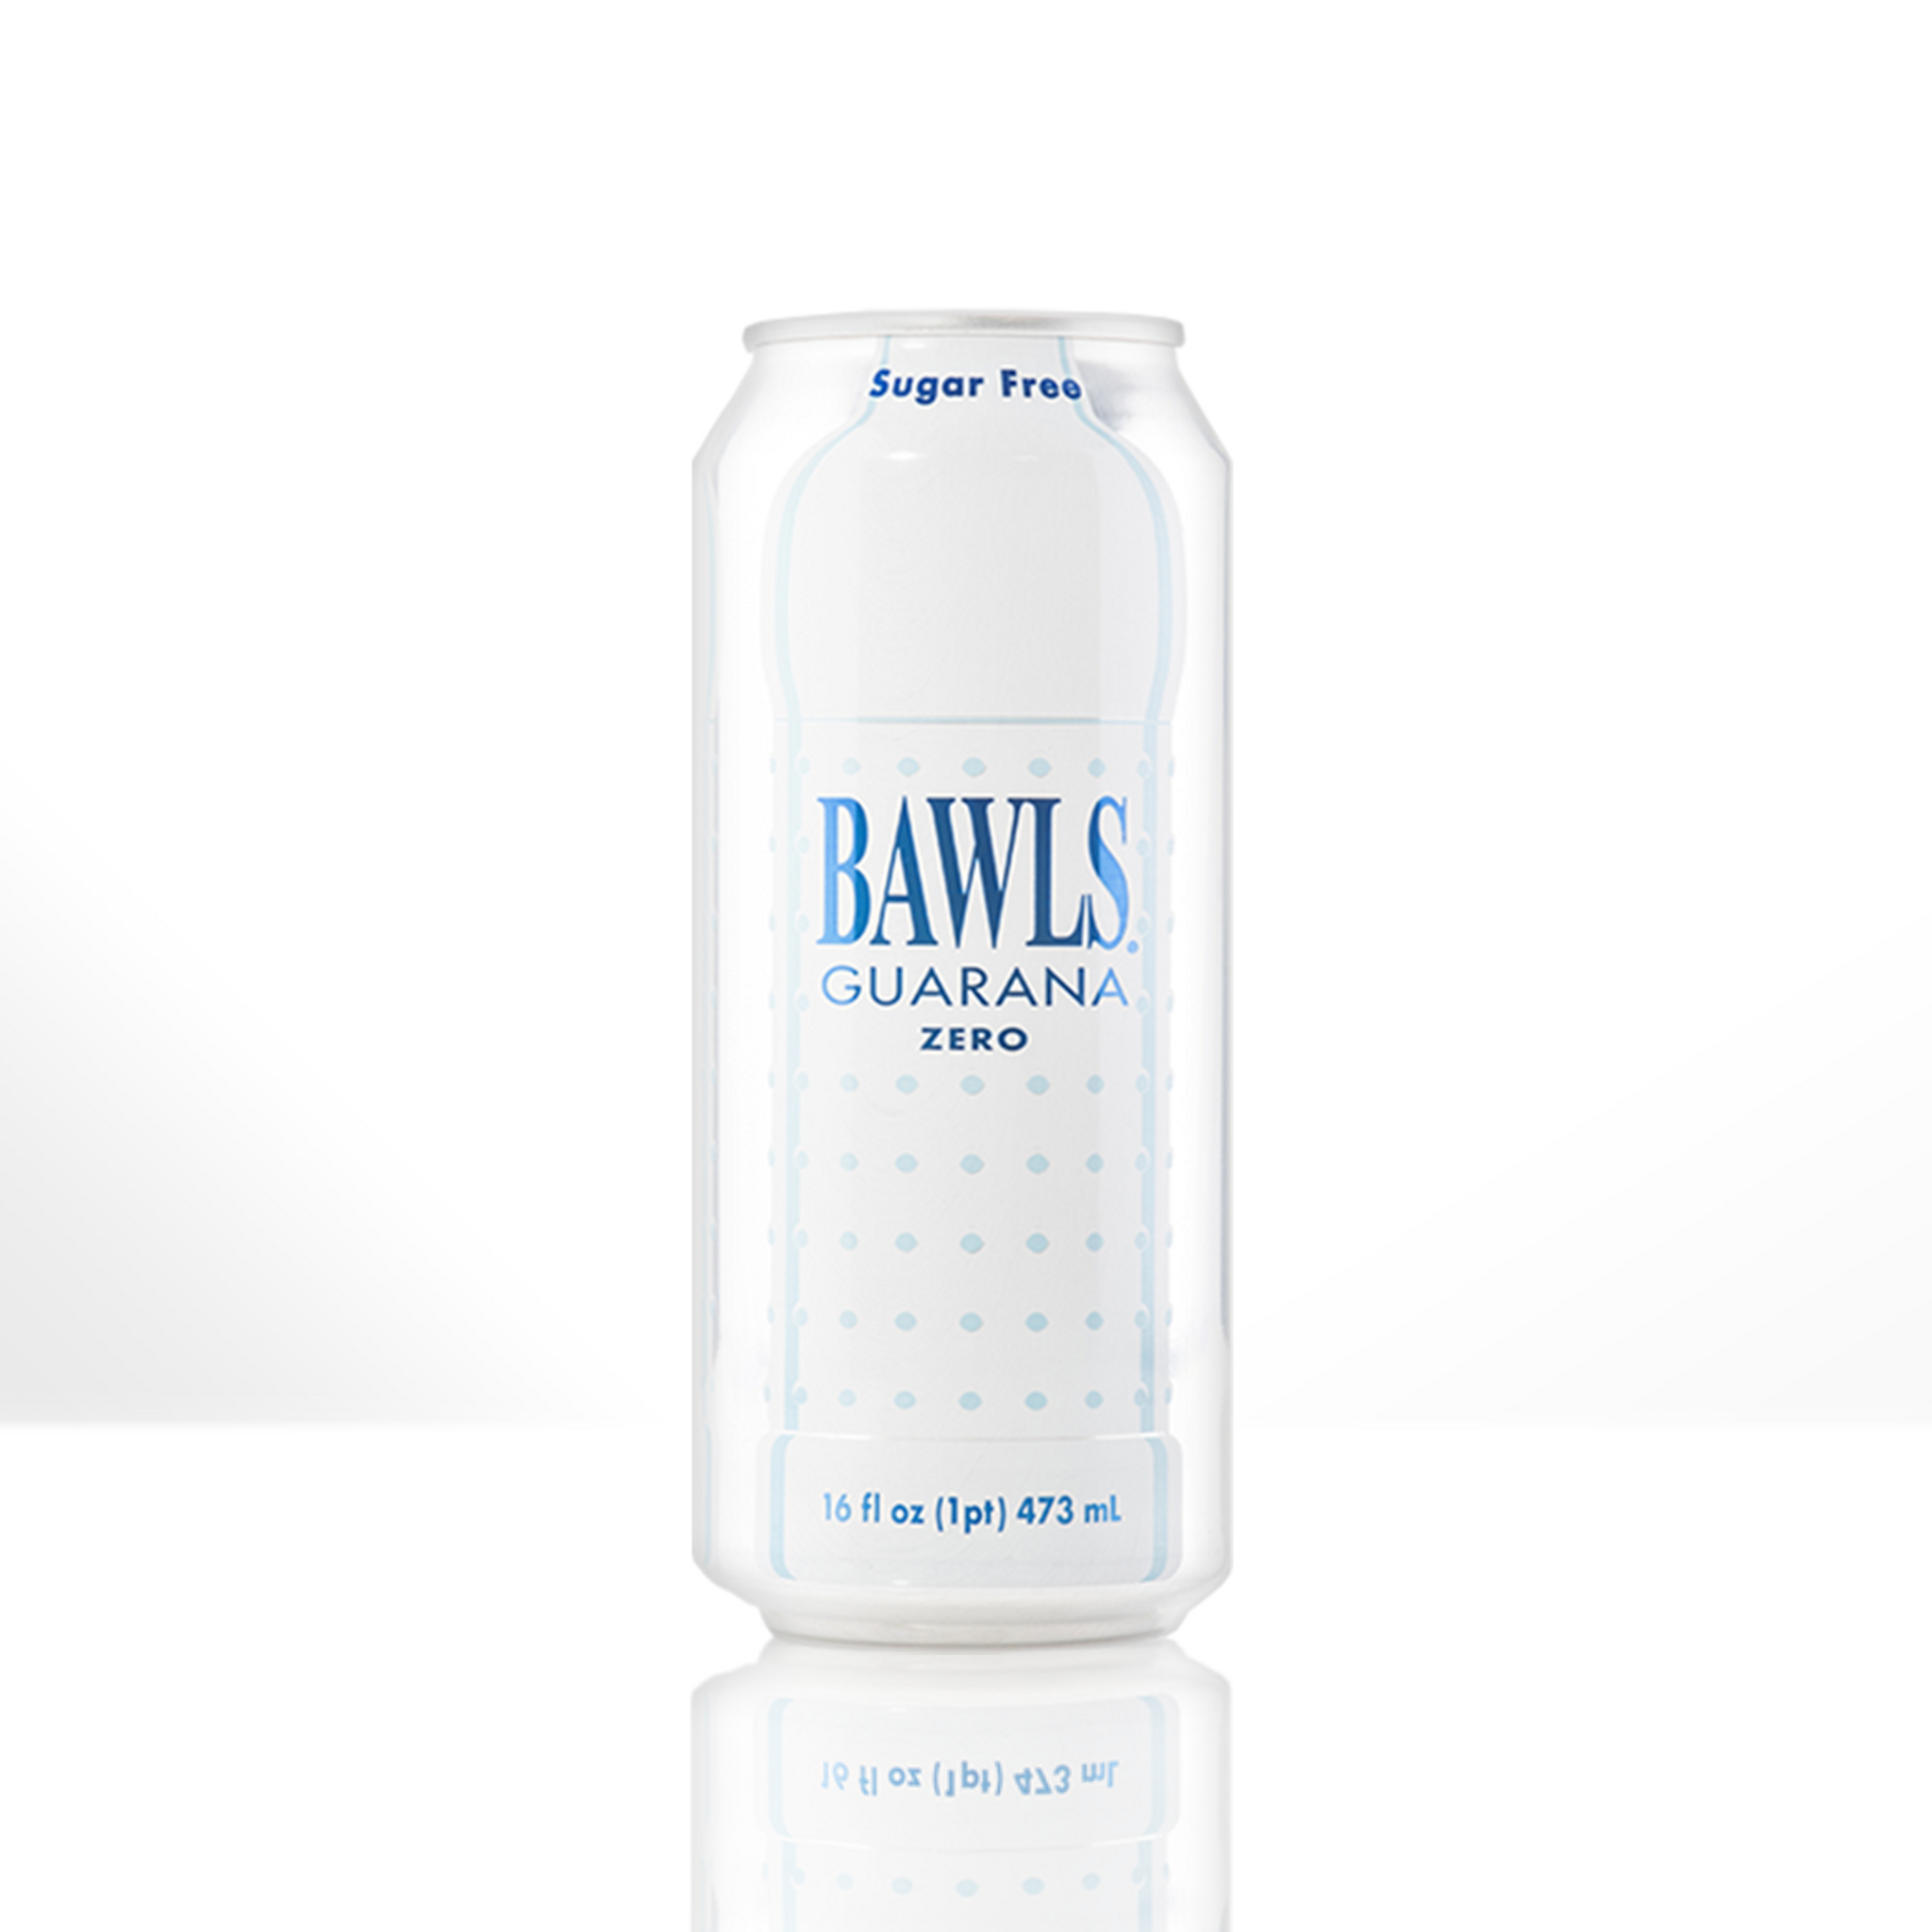 The End Games - Bawls back at the shop! #bawls #teglife #charlottesville  #energydrink #classic #lanparty #magfest #drinks